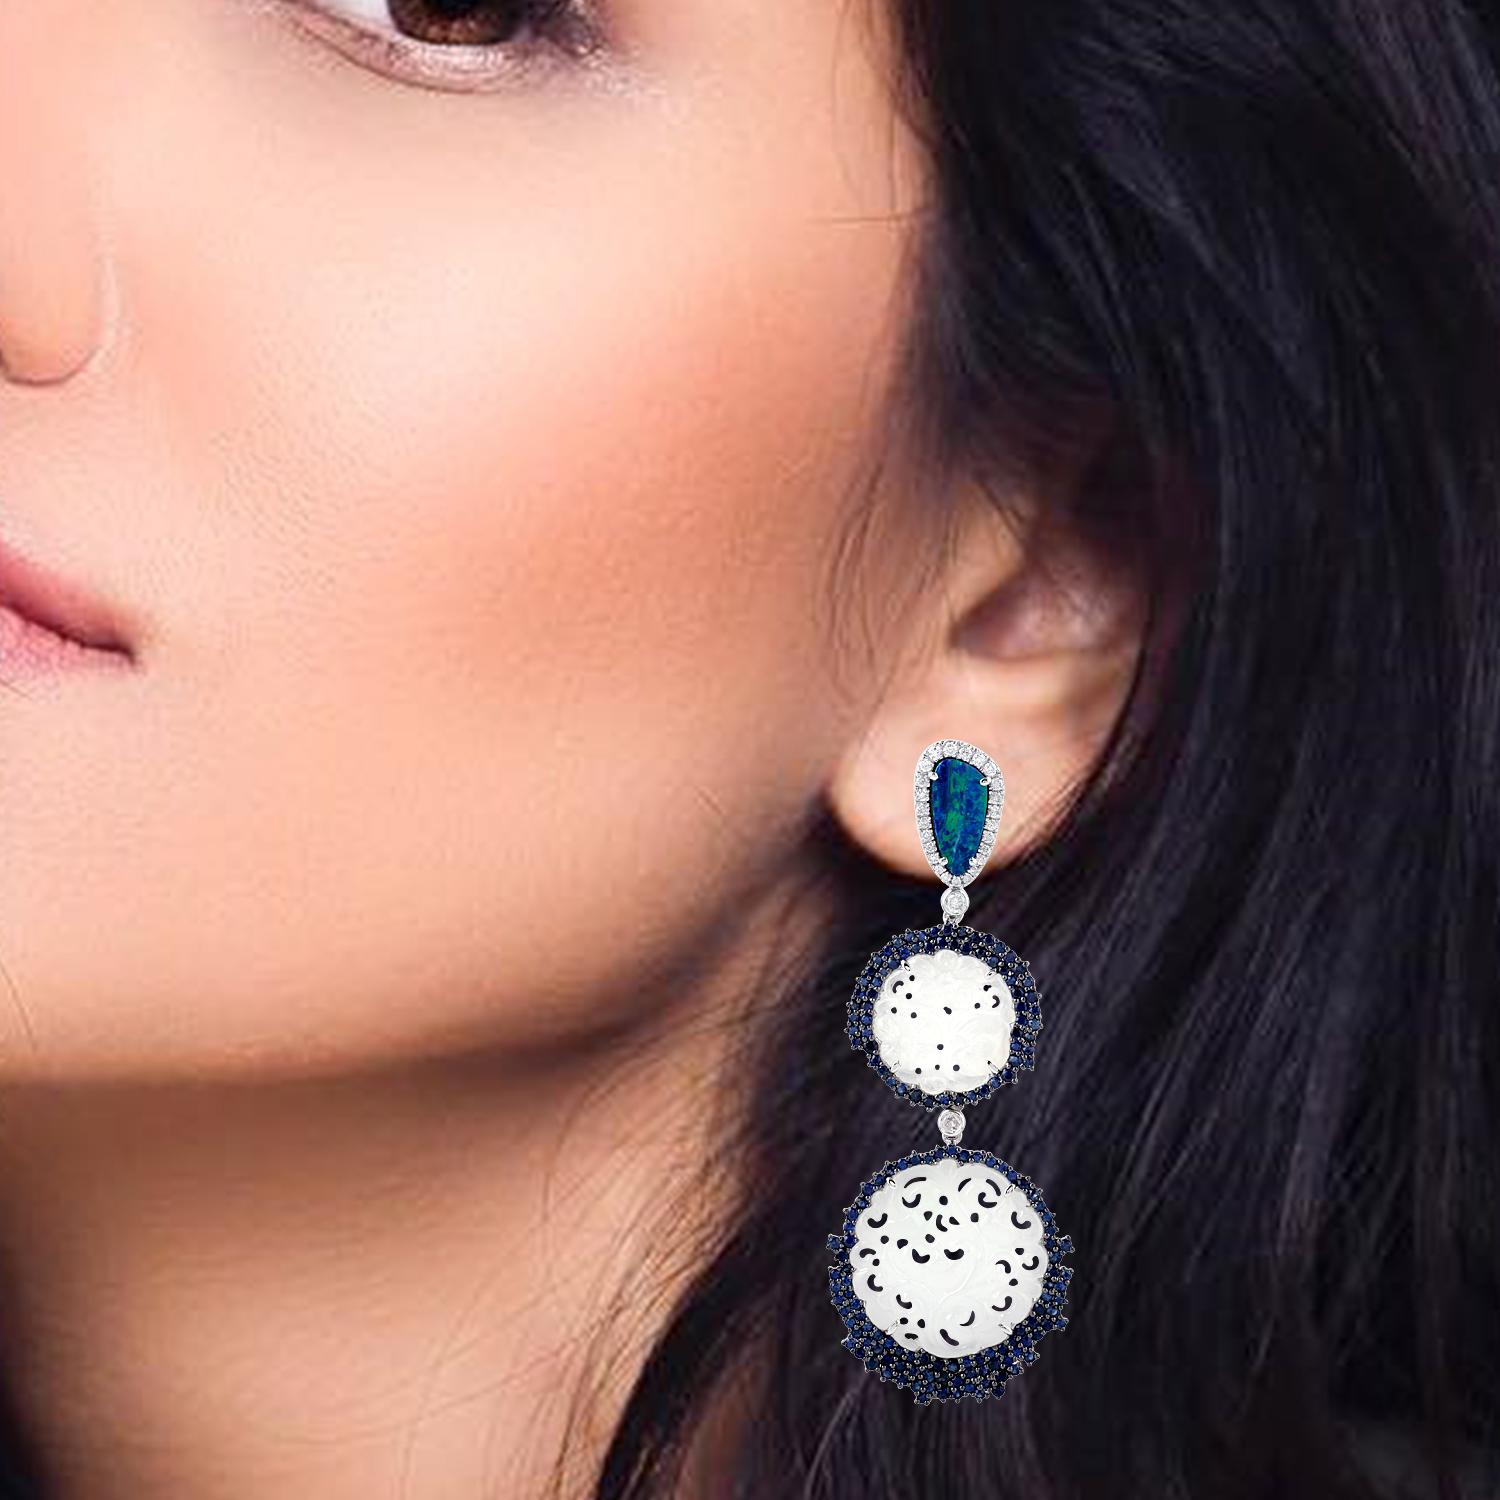 Cast from 18-karat gold, these stunning drop earrings are hand set with 23.59 carats Jade, 2.53 carats Opal, Sapphire and .65 carats of glimmering diamonds. 

FOLLOW  MEGHNA JEWELS storefront to view the latest collection & exclusive pieces.  Meghna